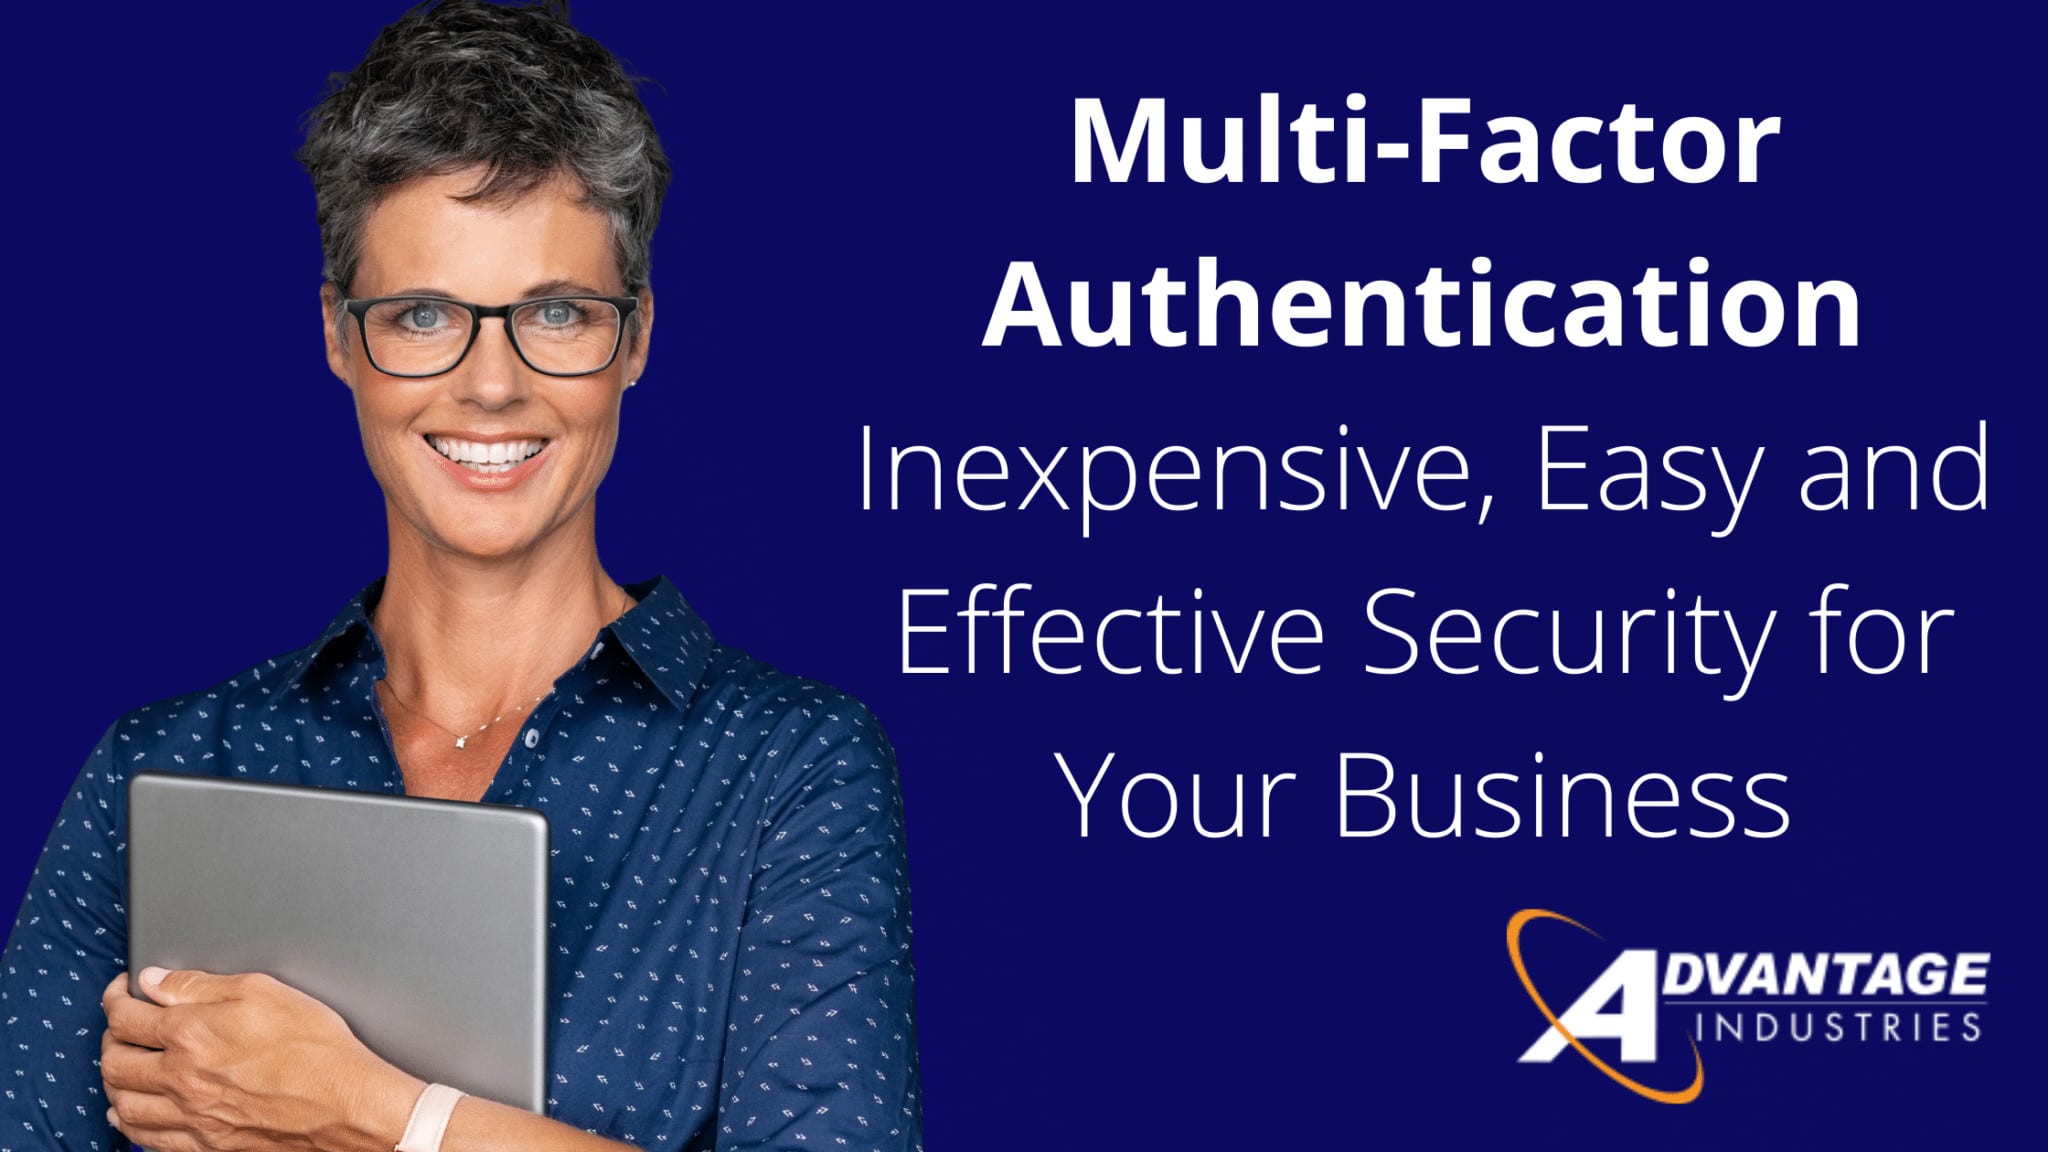 Multi-Factor Authentication Inexpensive, Easy and Effective Security for Your Business